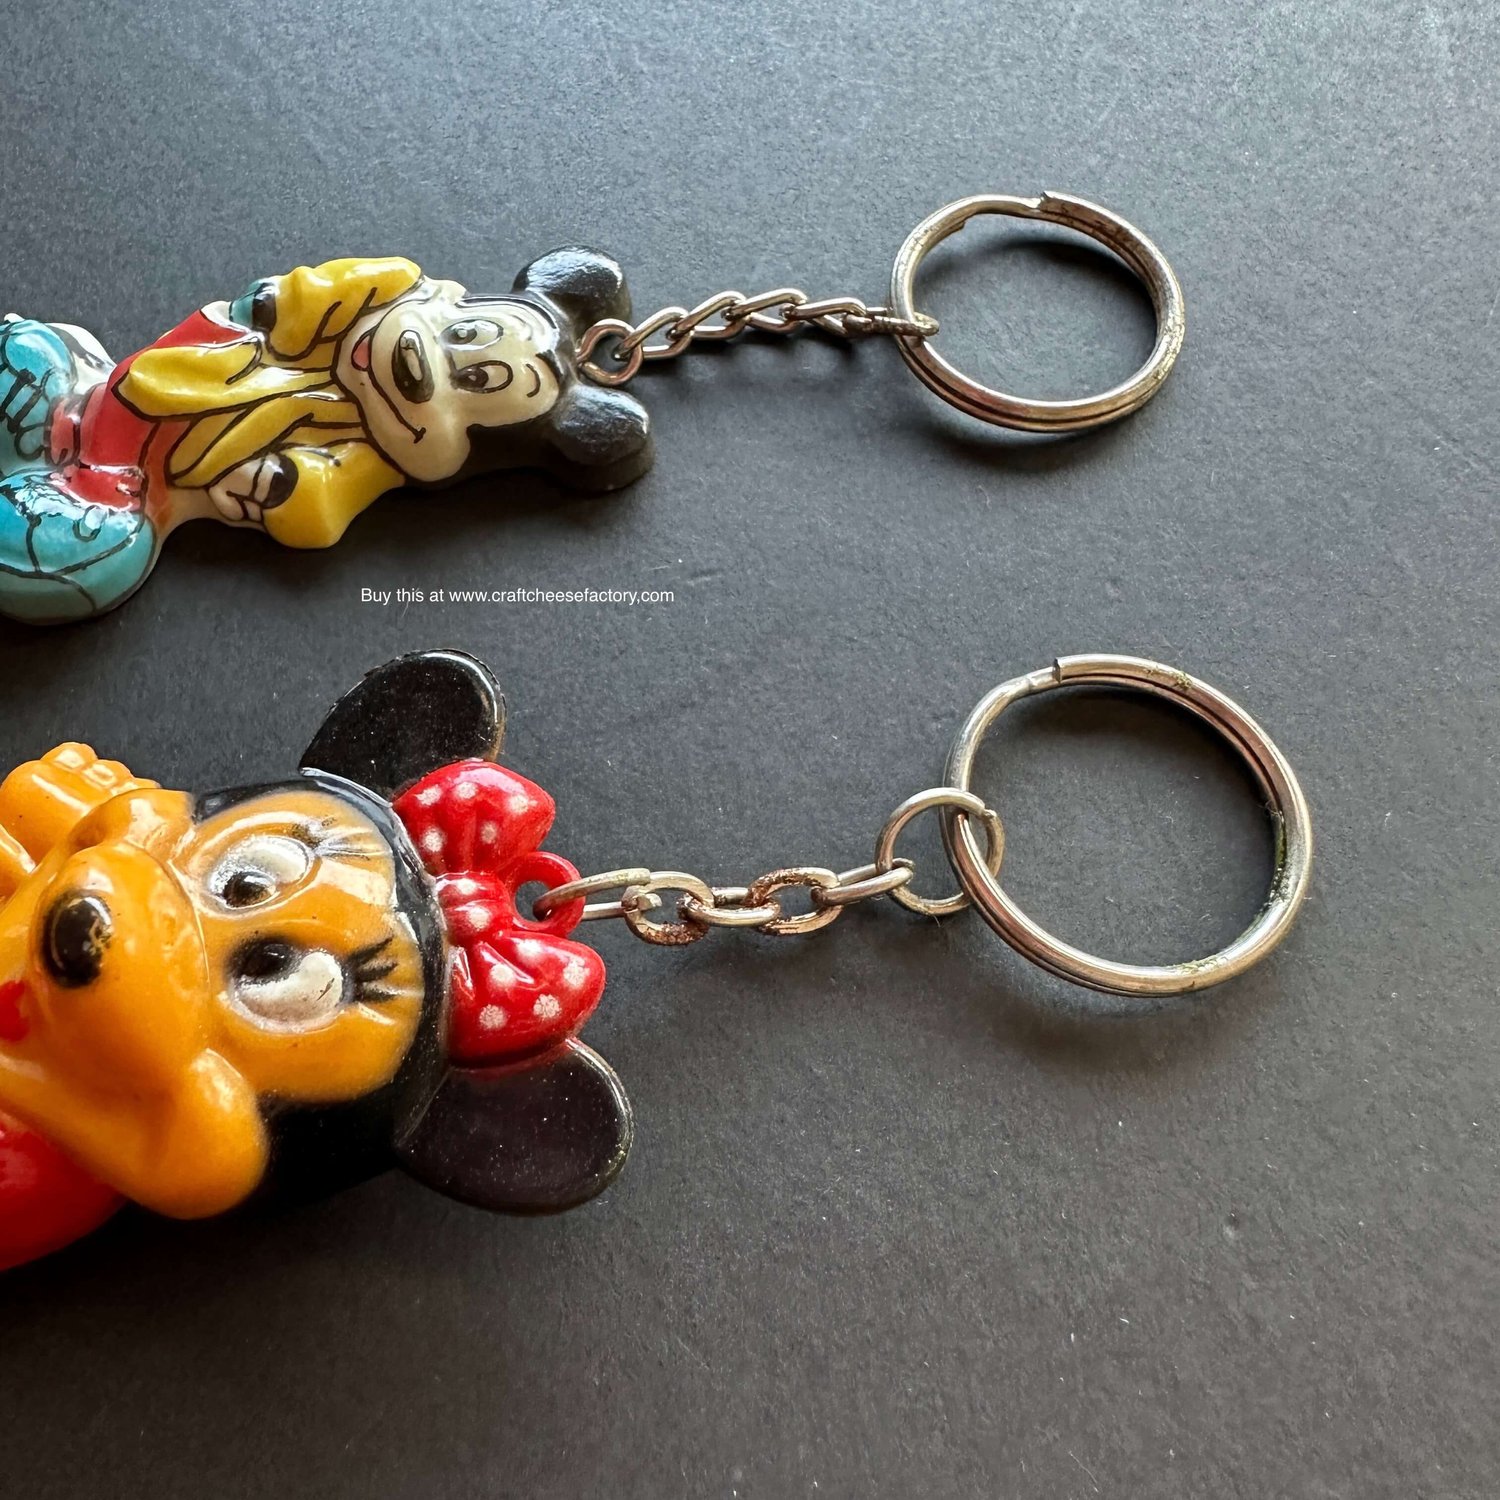 mickey mouse keychain